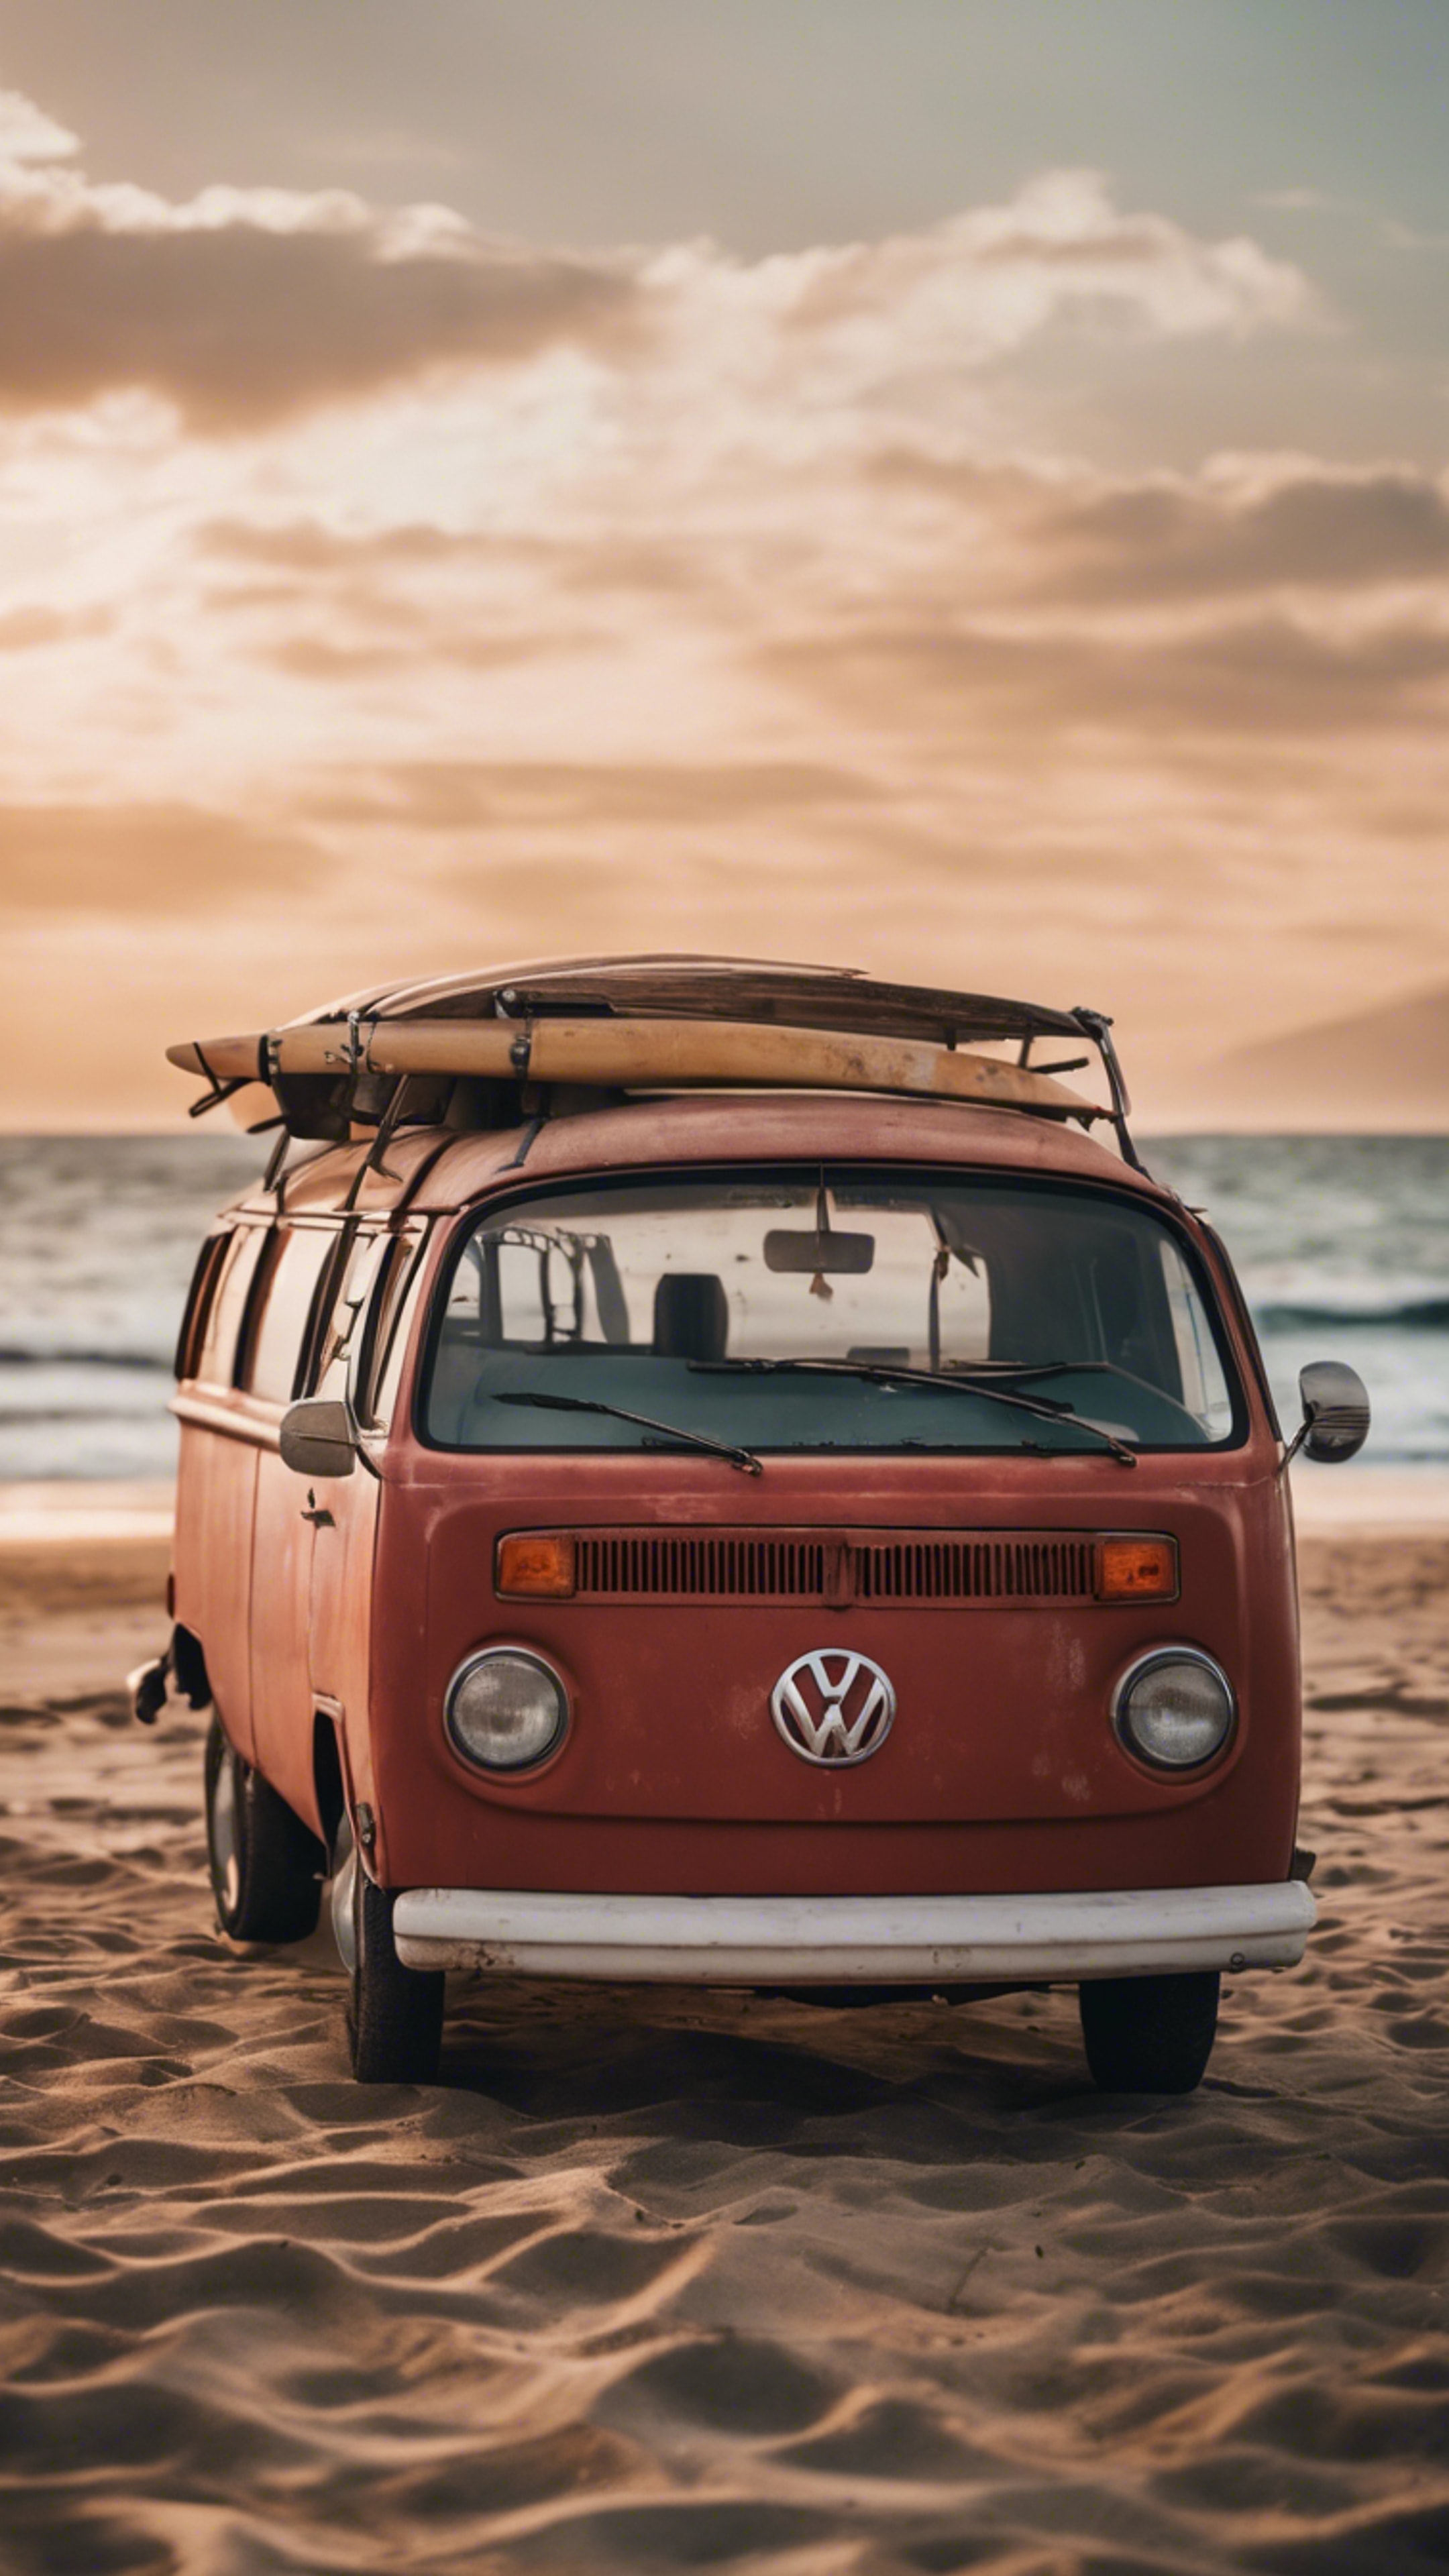 An old, rusted red Volkswagen van parked at a beach with the sunset in the backdrop, surfboards leaning against it.壁紙[f96813b3e584499cadbf]